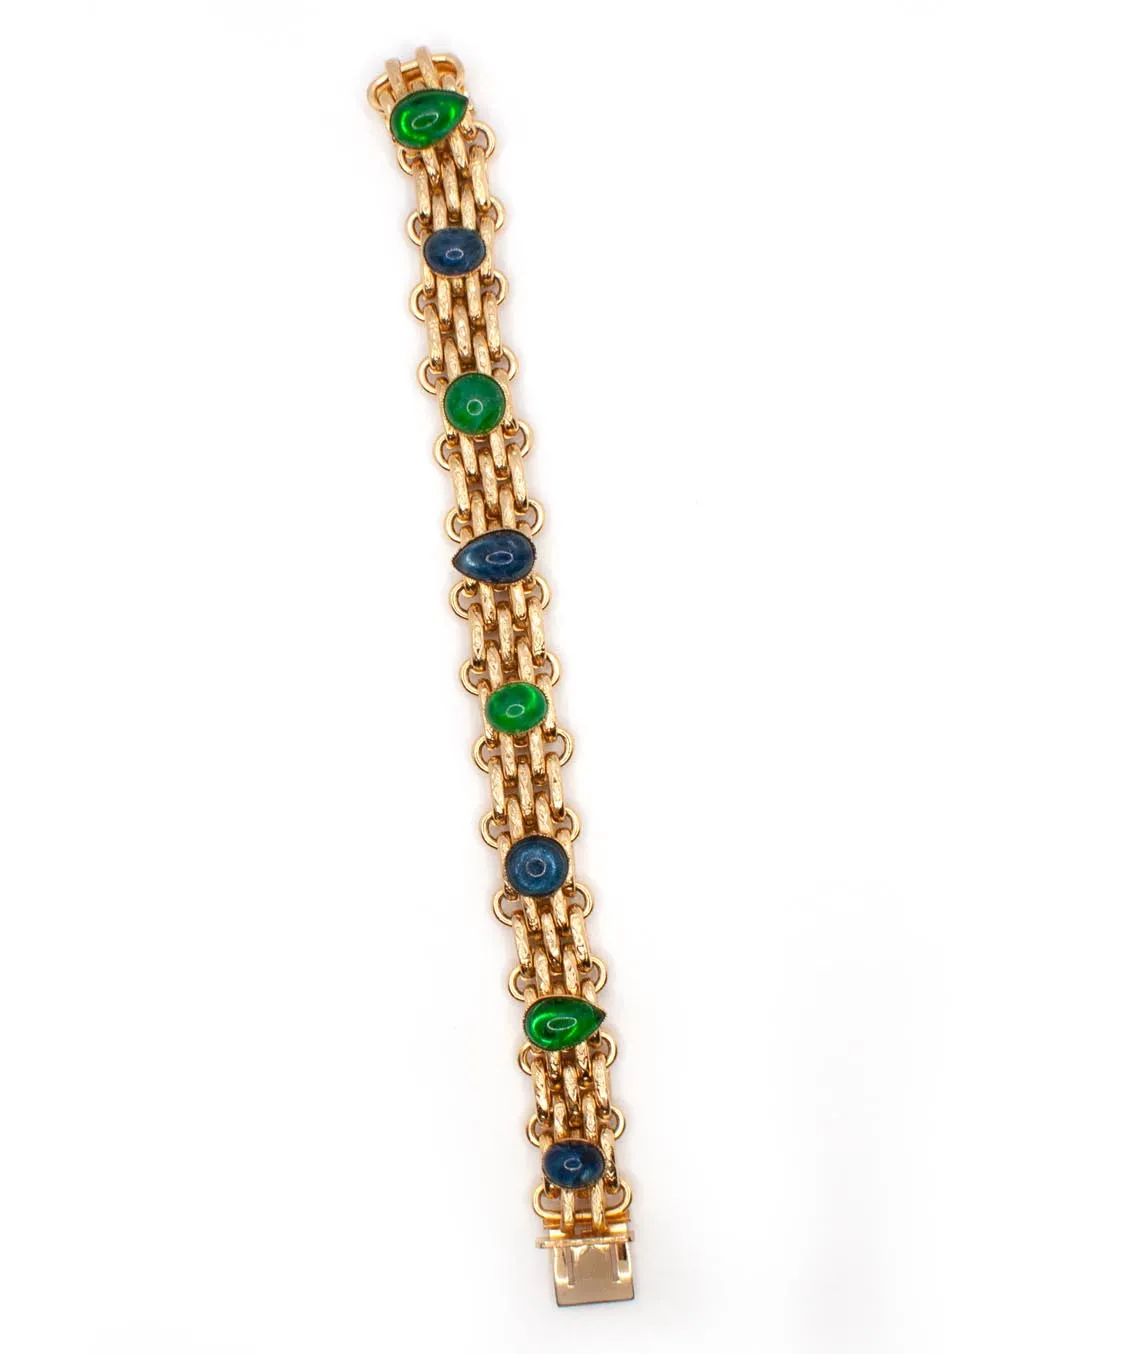 Green and blue glass gold fancy link bracelet by Christian Dior